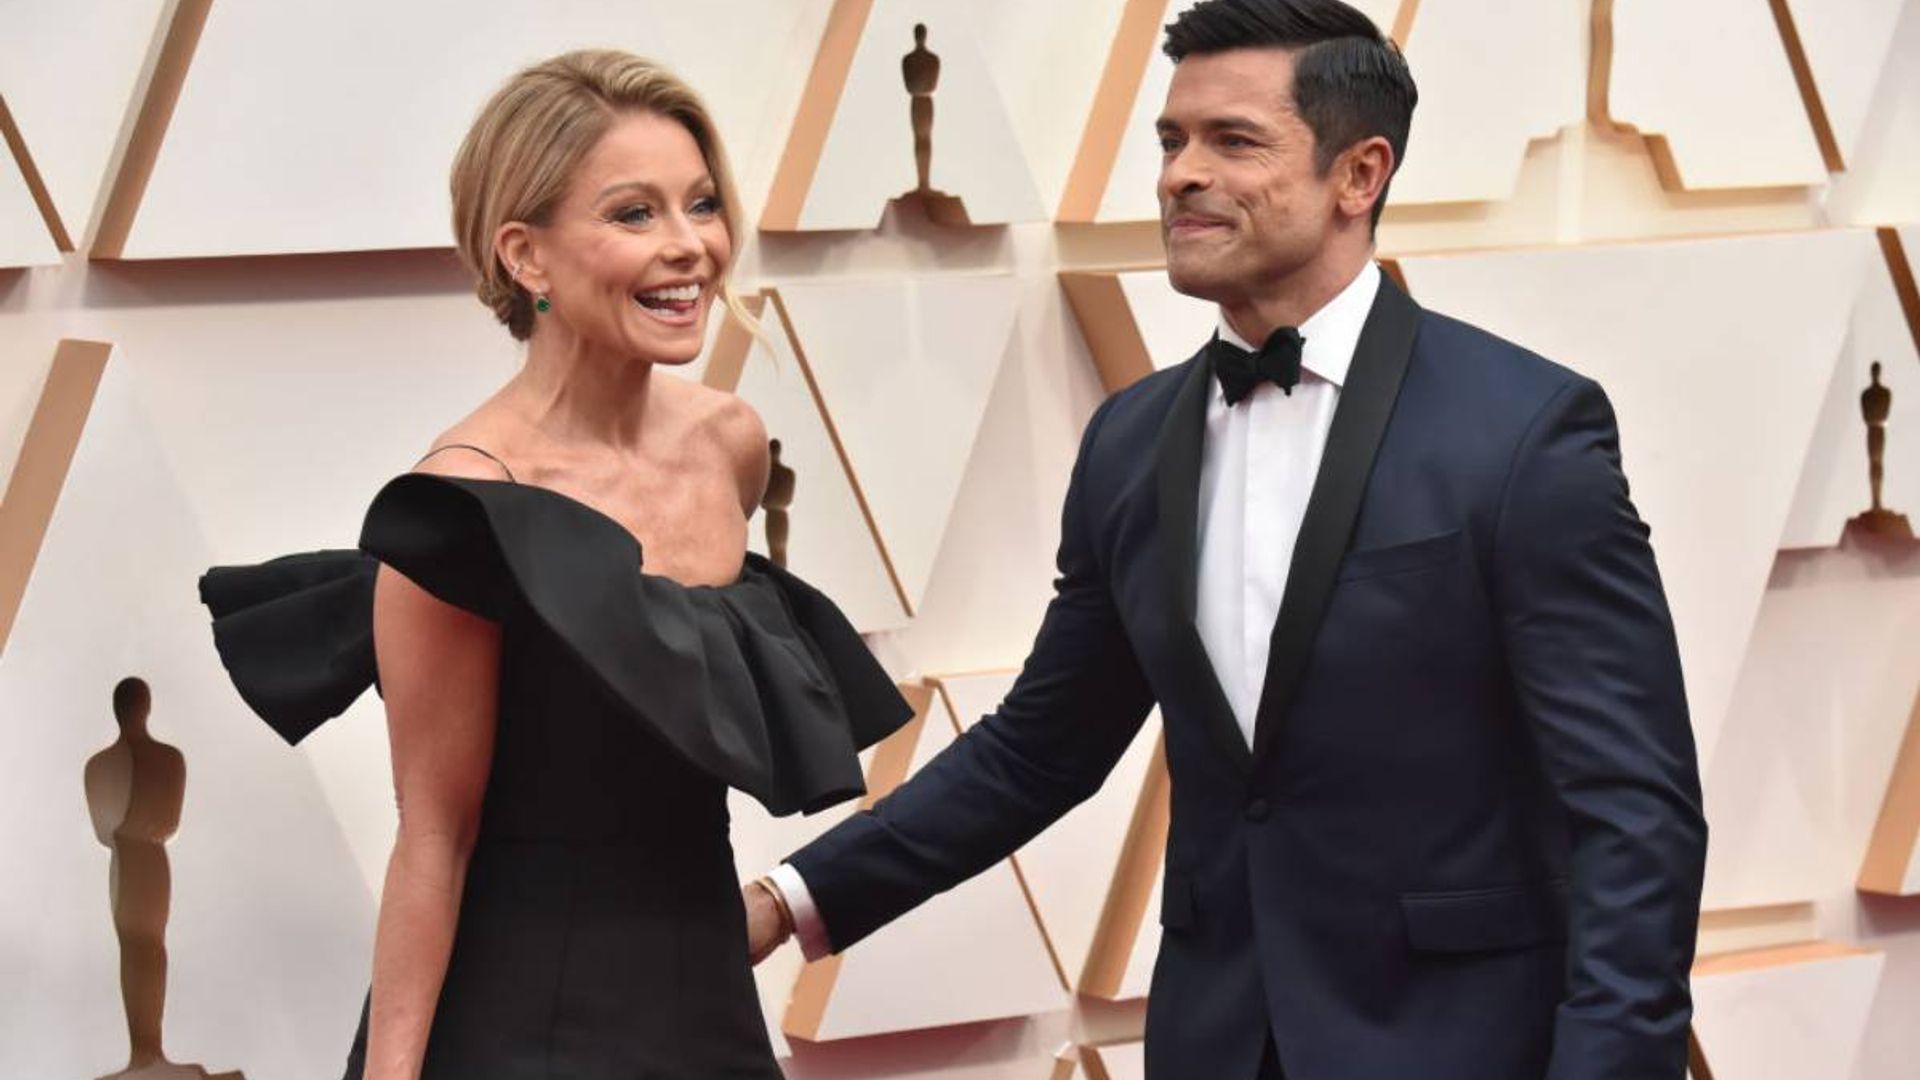 Kelly Ripa's eating habits are the talk of LIVE in amusing on-air moment with her husband